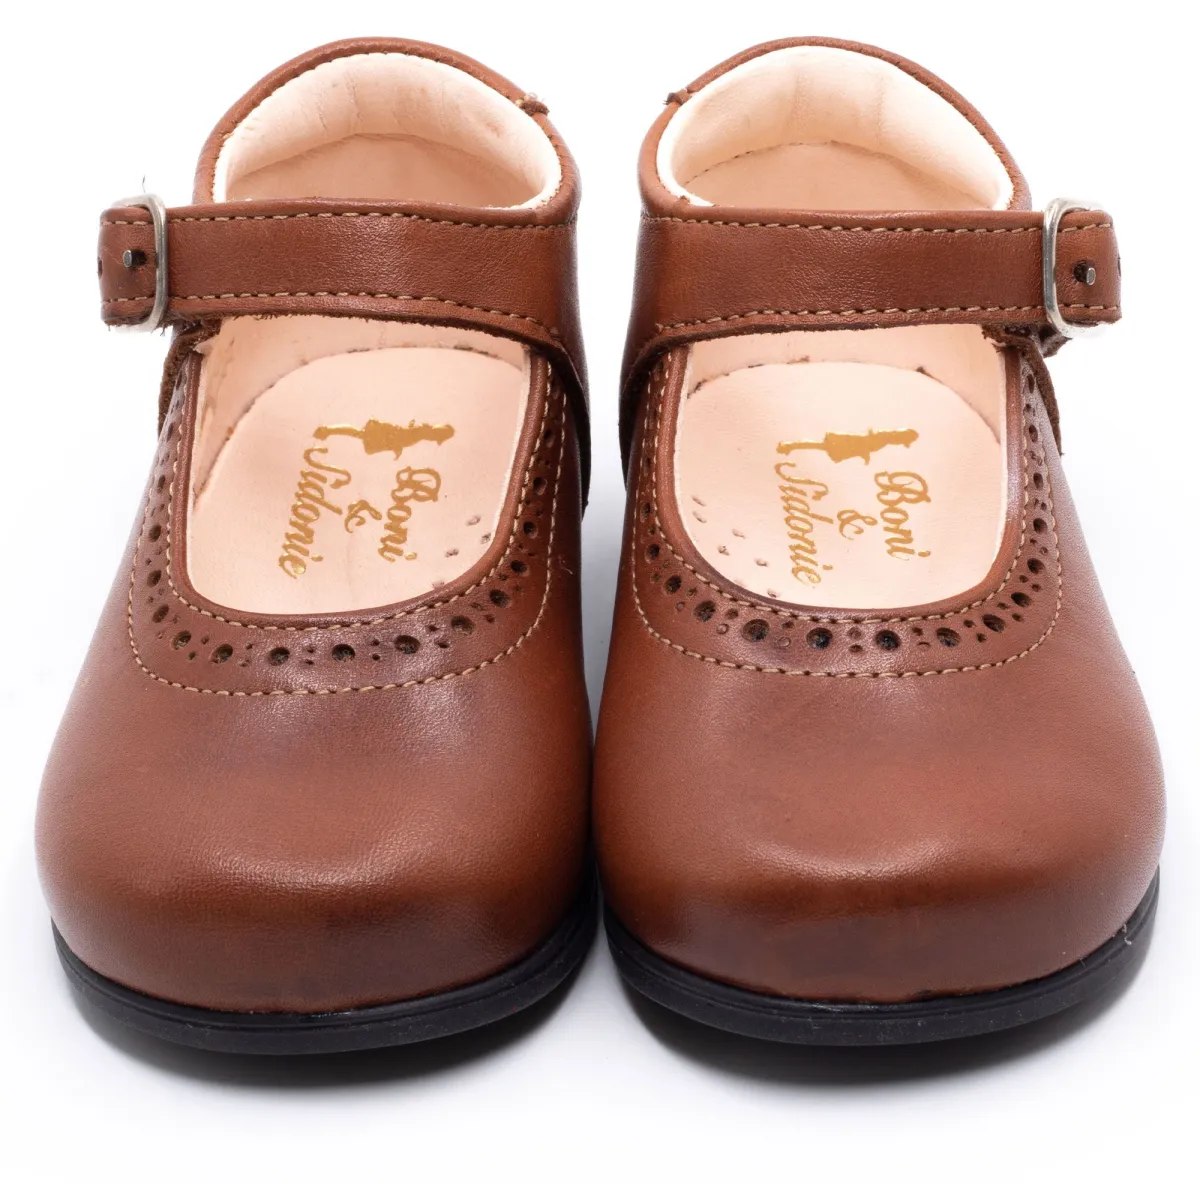 Boni Isabelle – Shoes for baby girls